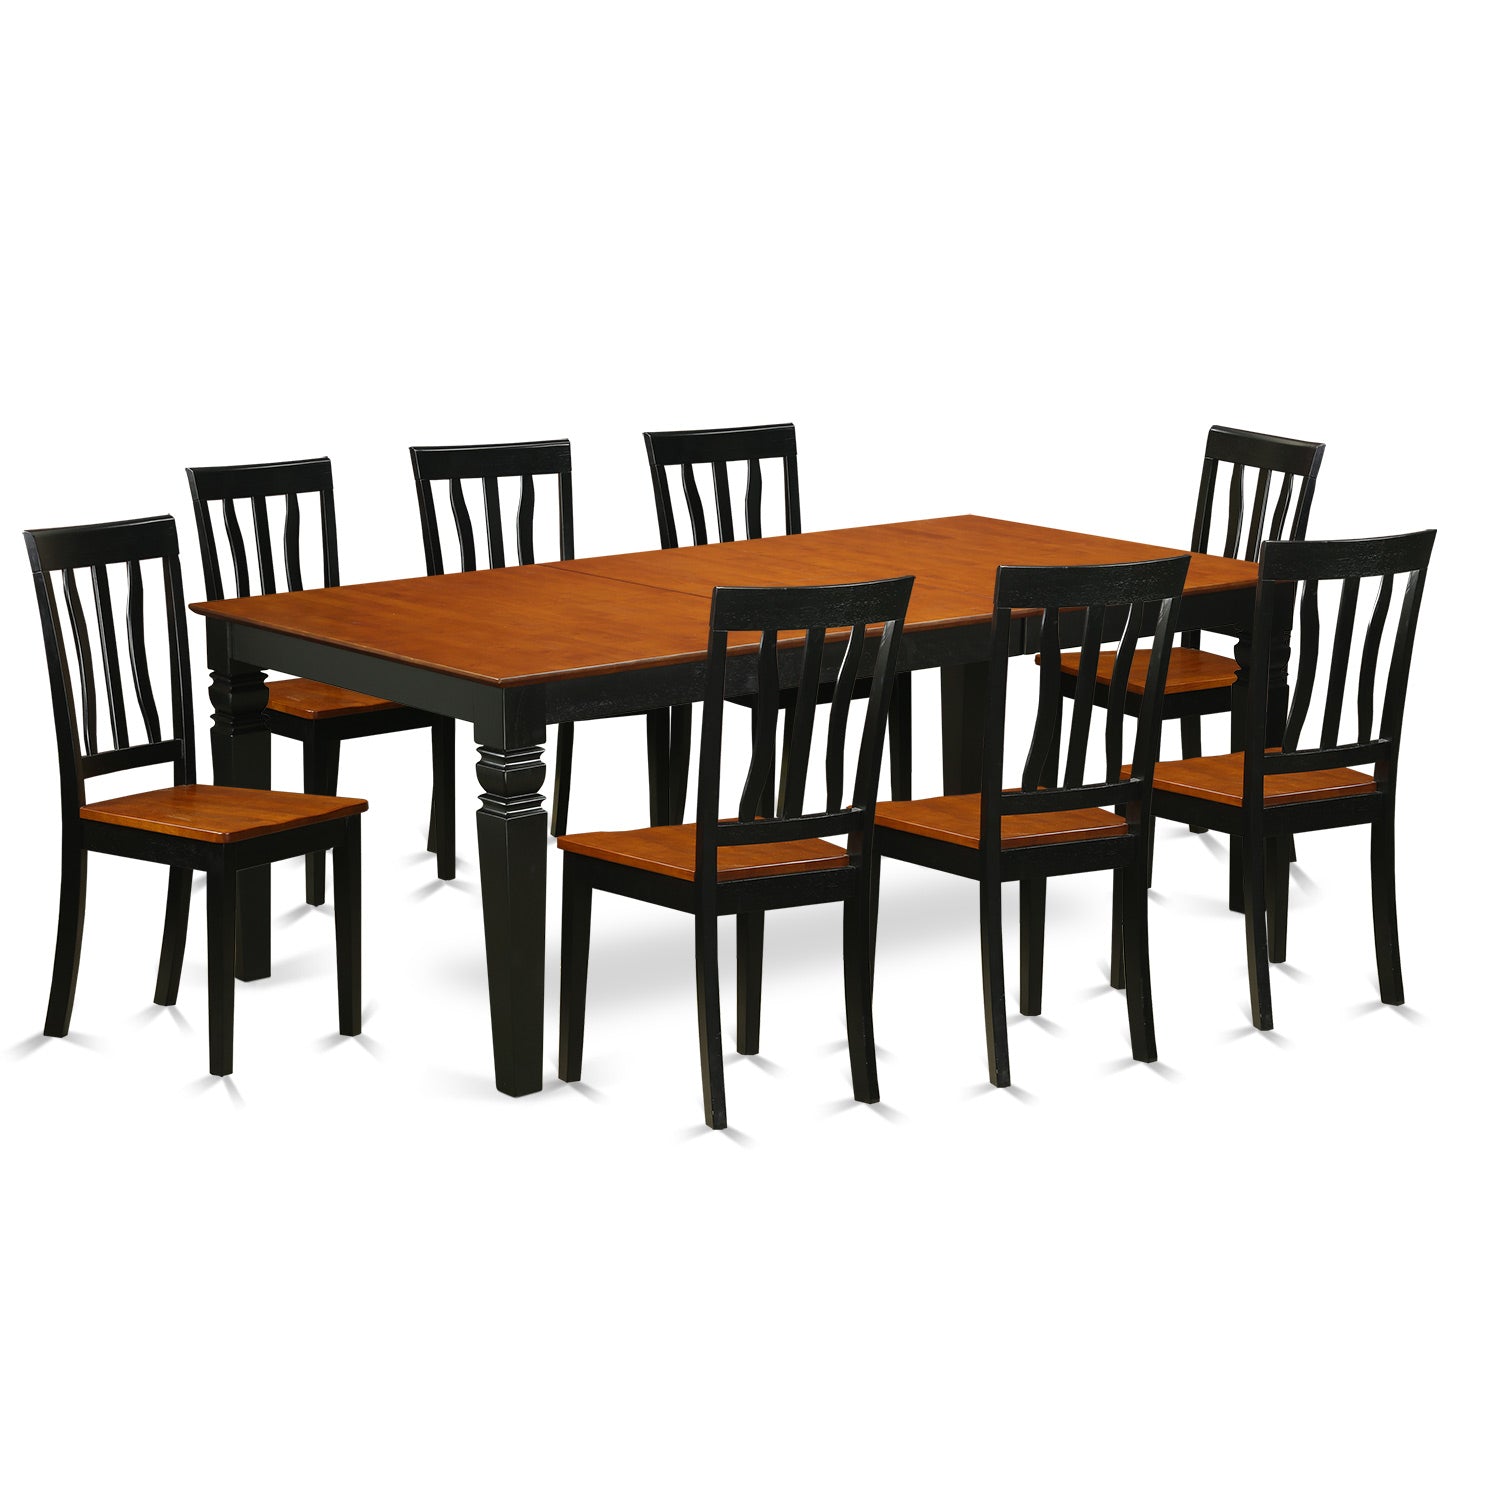 LGAN9-BCH-W 9 PcKitchen dinette set with a Table and 8 Dining Chairs in Black and Cherry